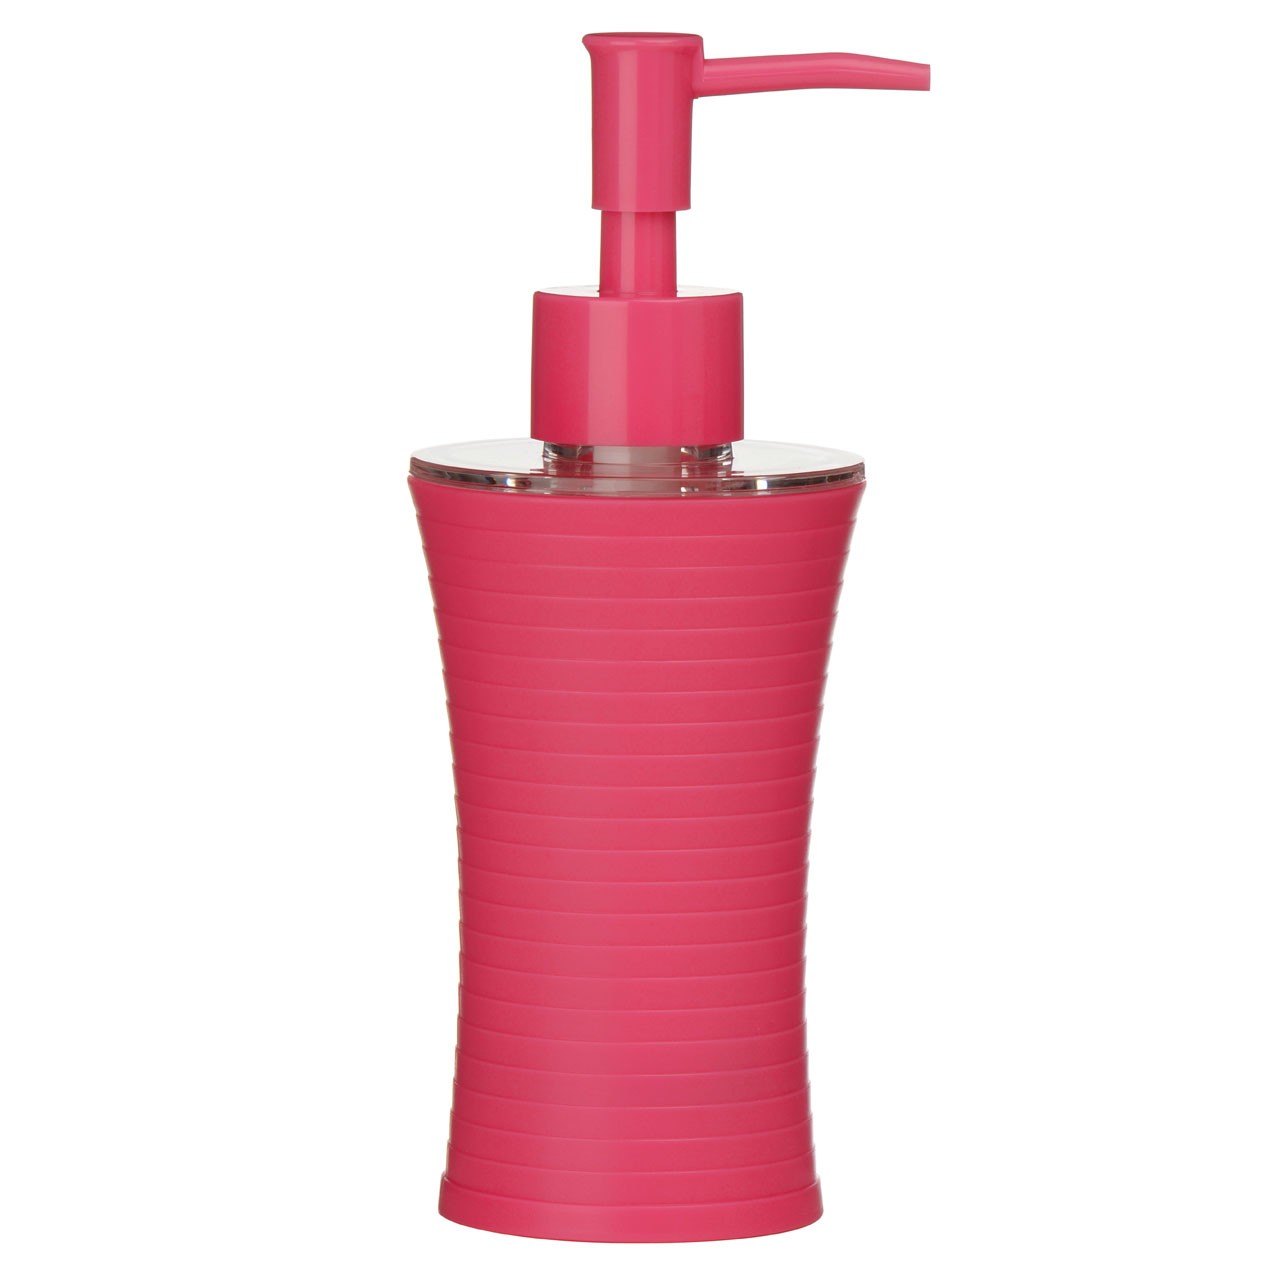 Lotion Dispenser, Hot Pink Plastic (ABS)